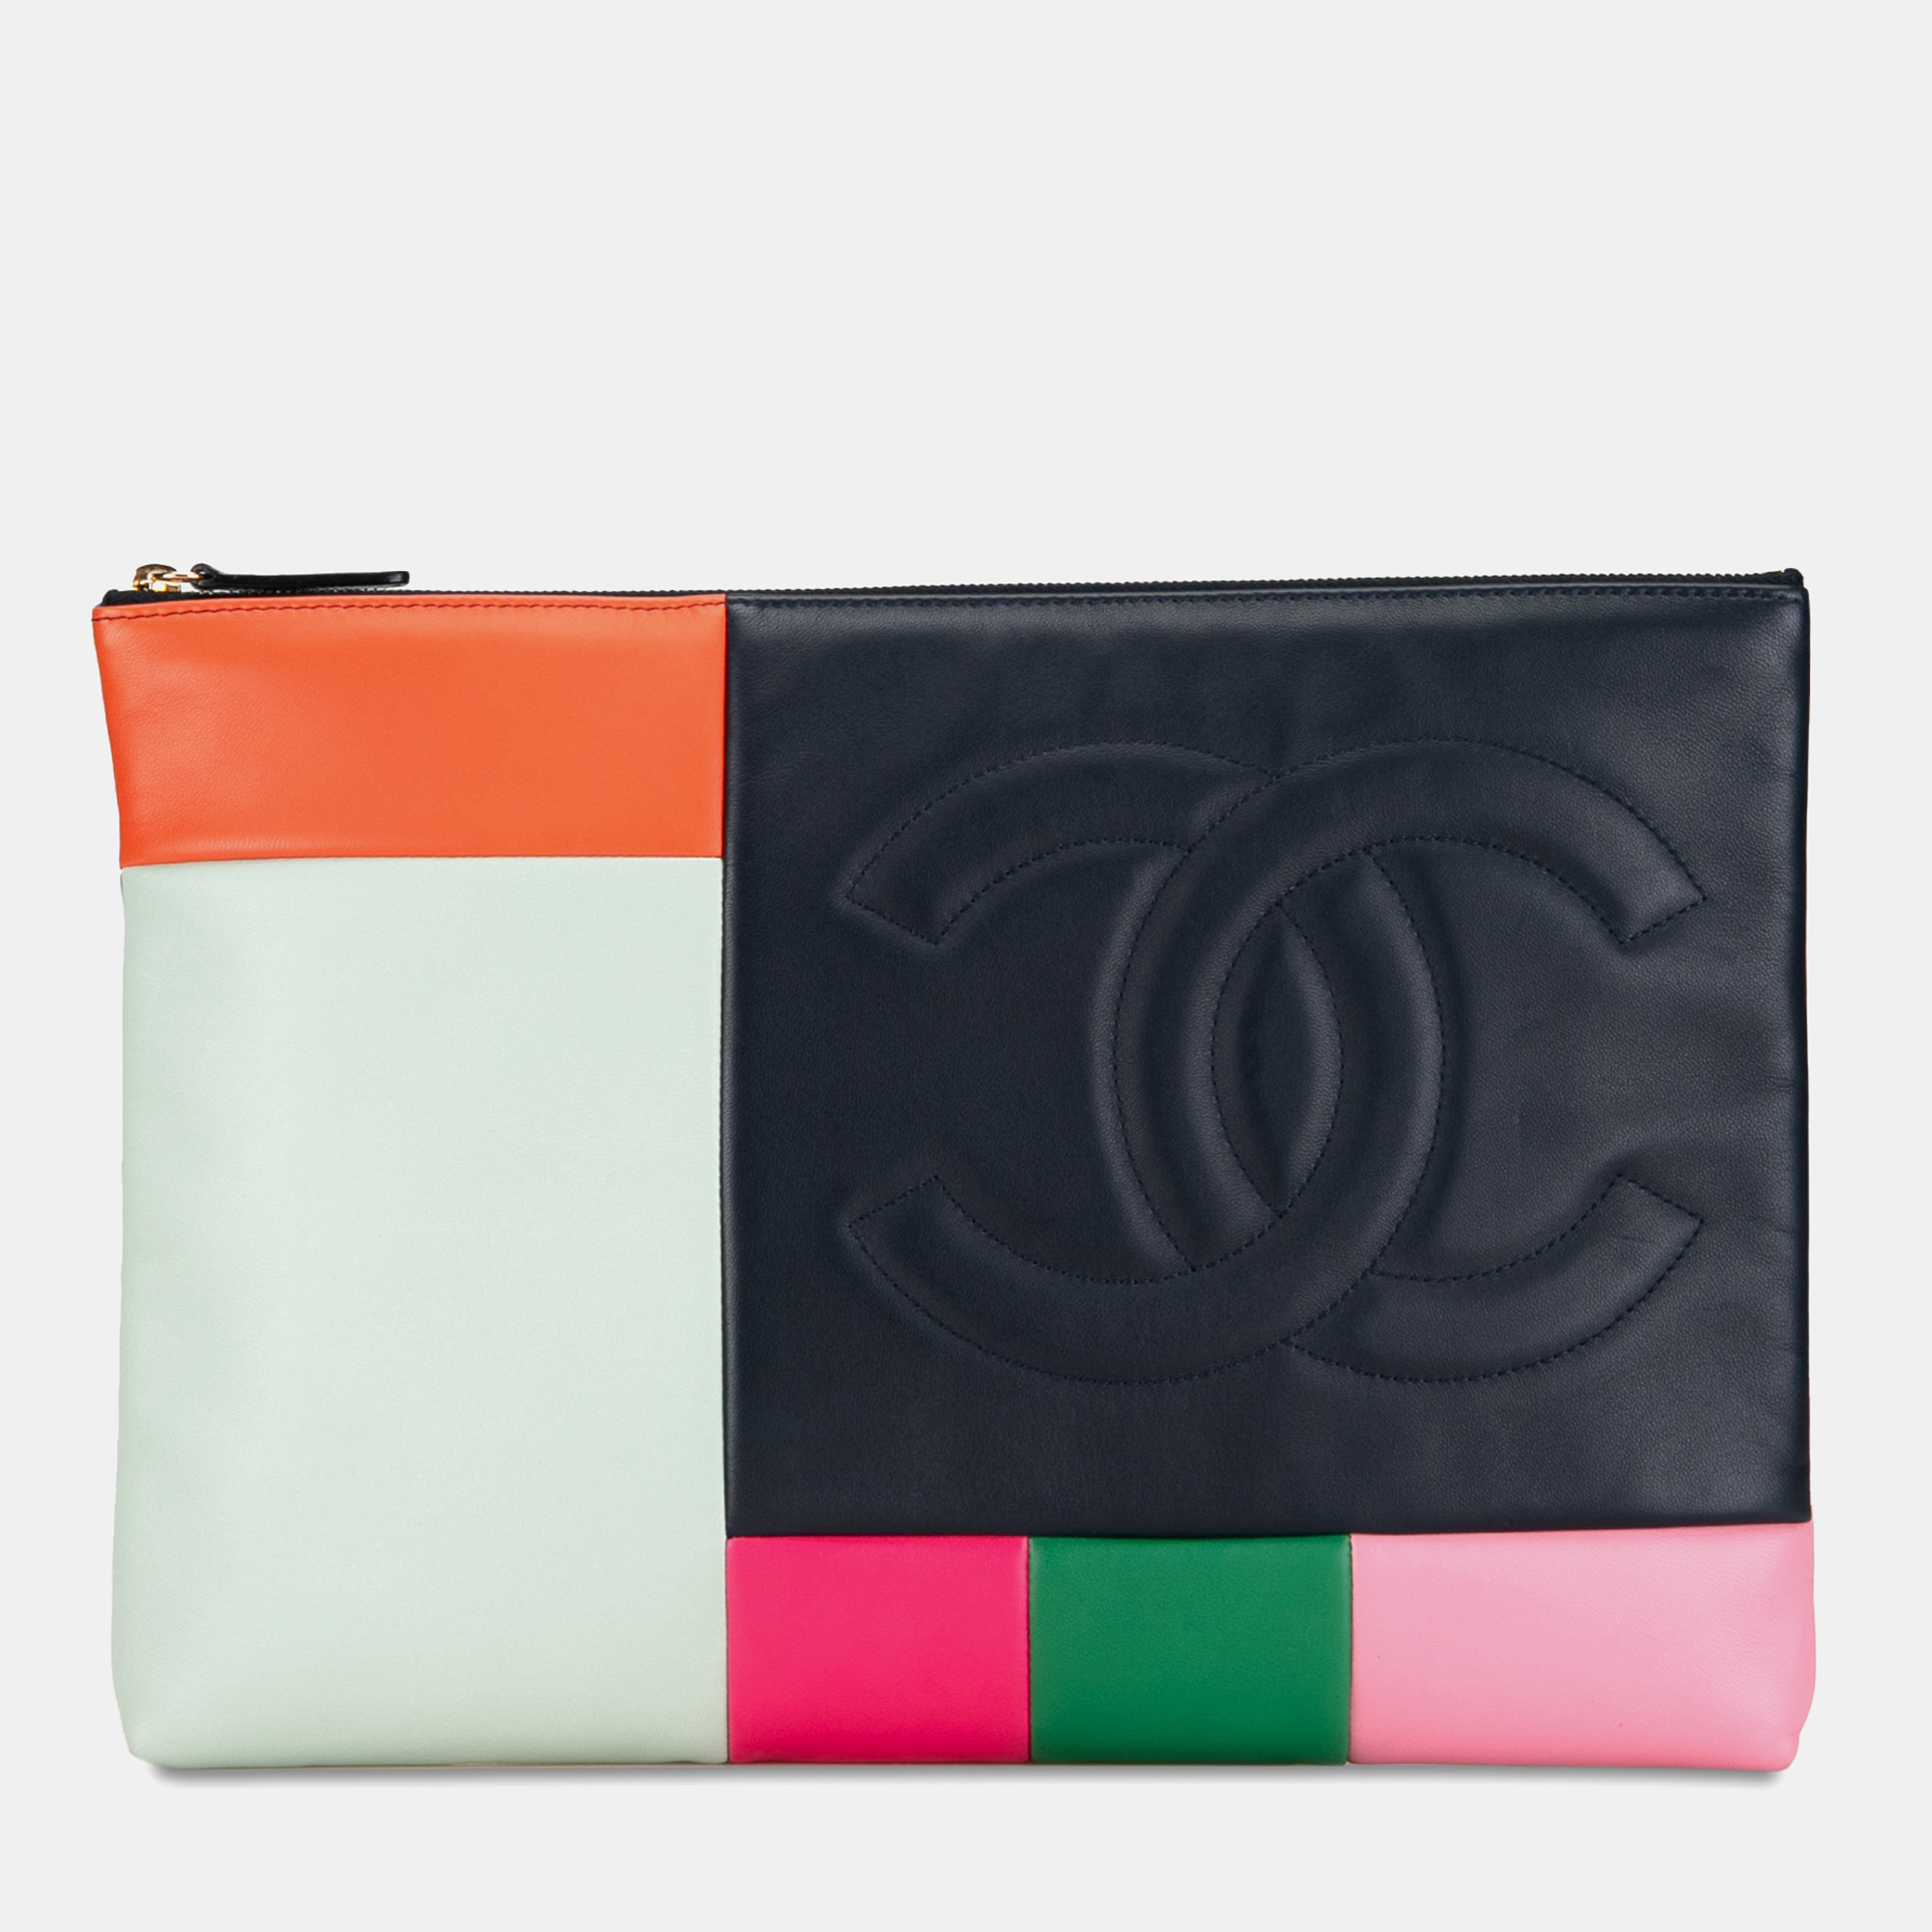 Chanel large lambskin colorblock patchwork o case